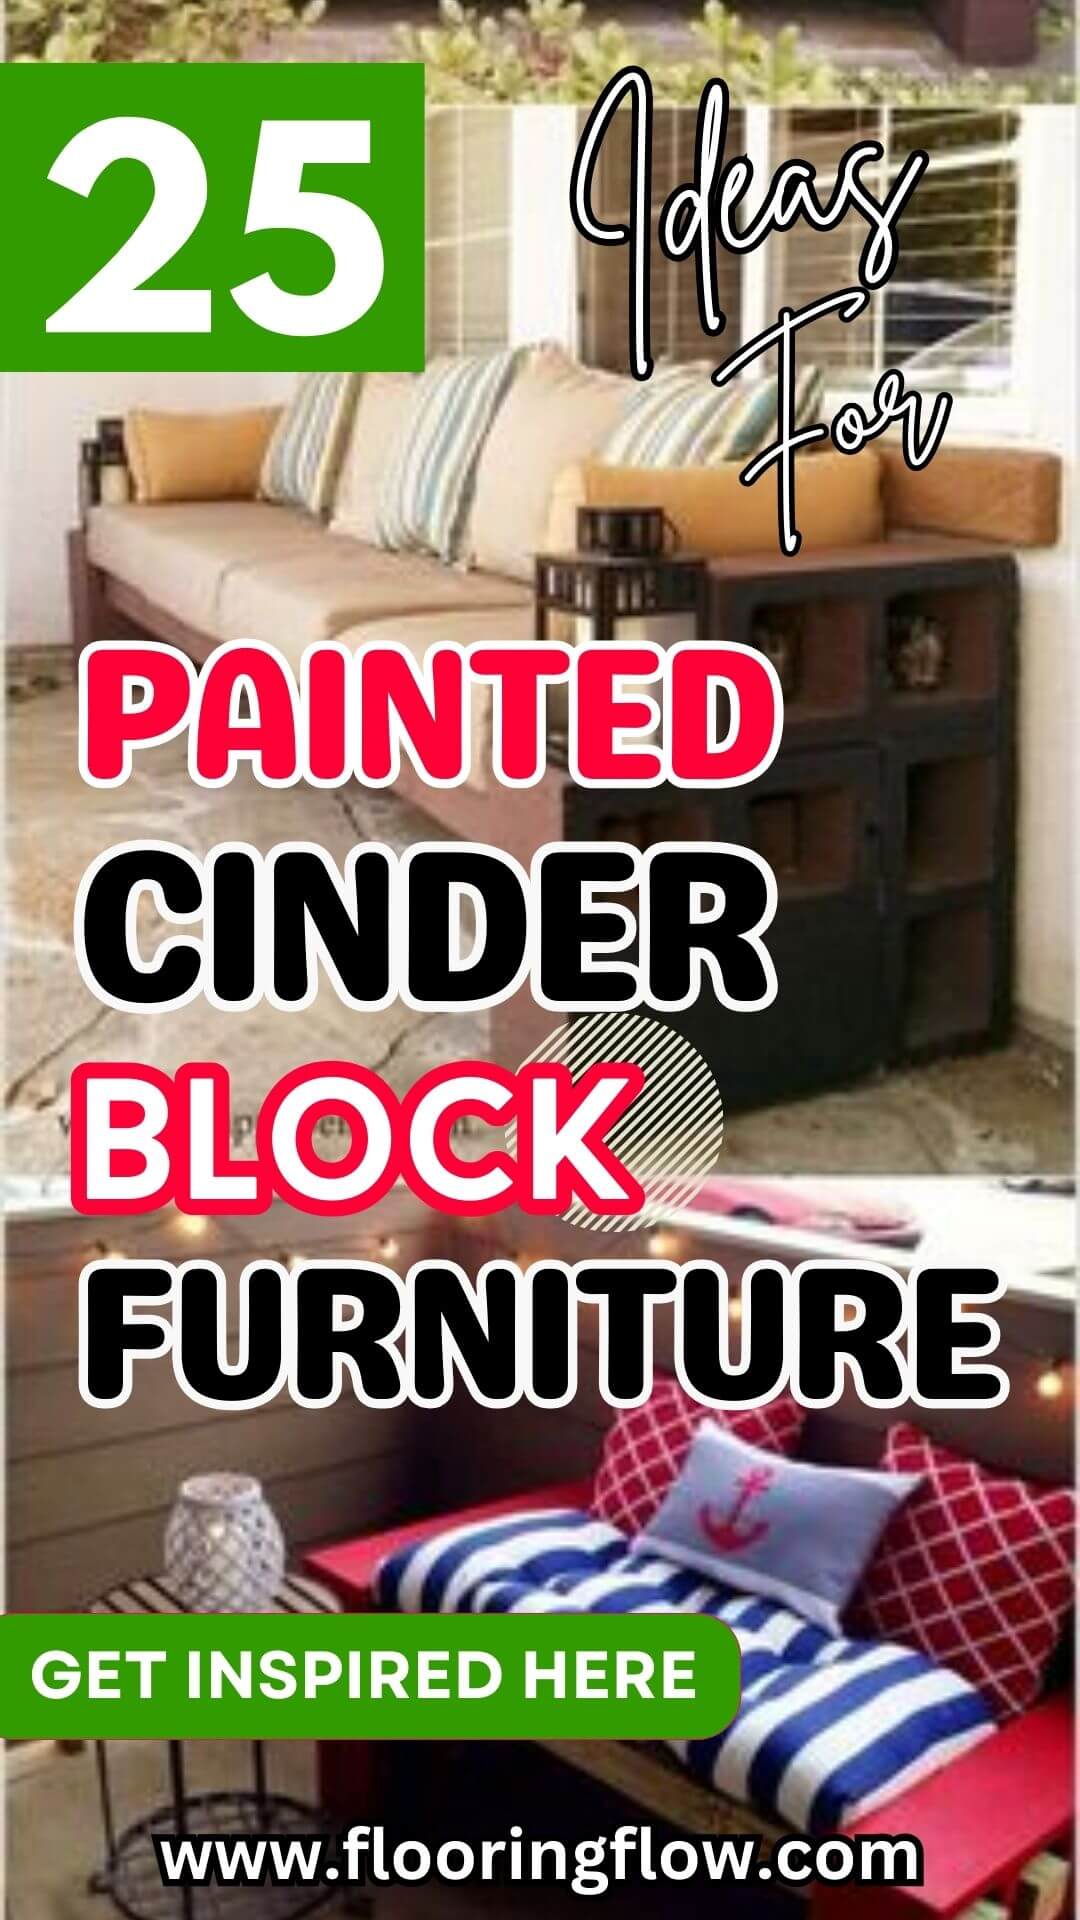 Creative Painted Cinder Block Furniture Ideas for Home